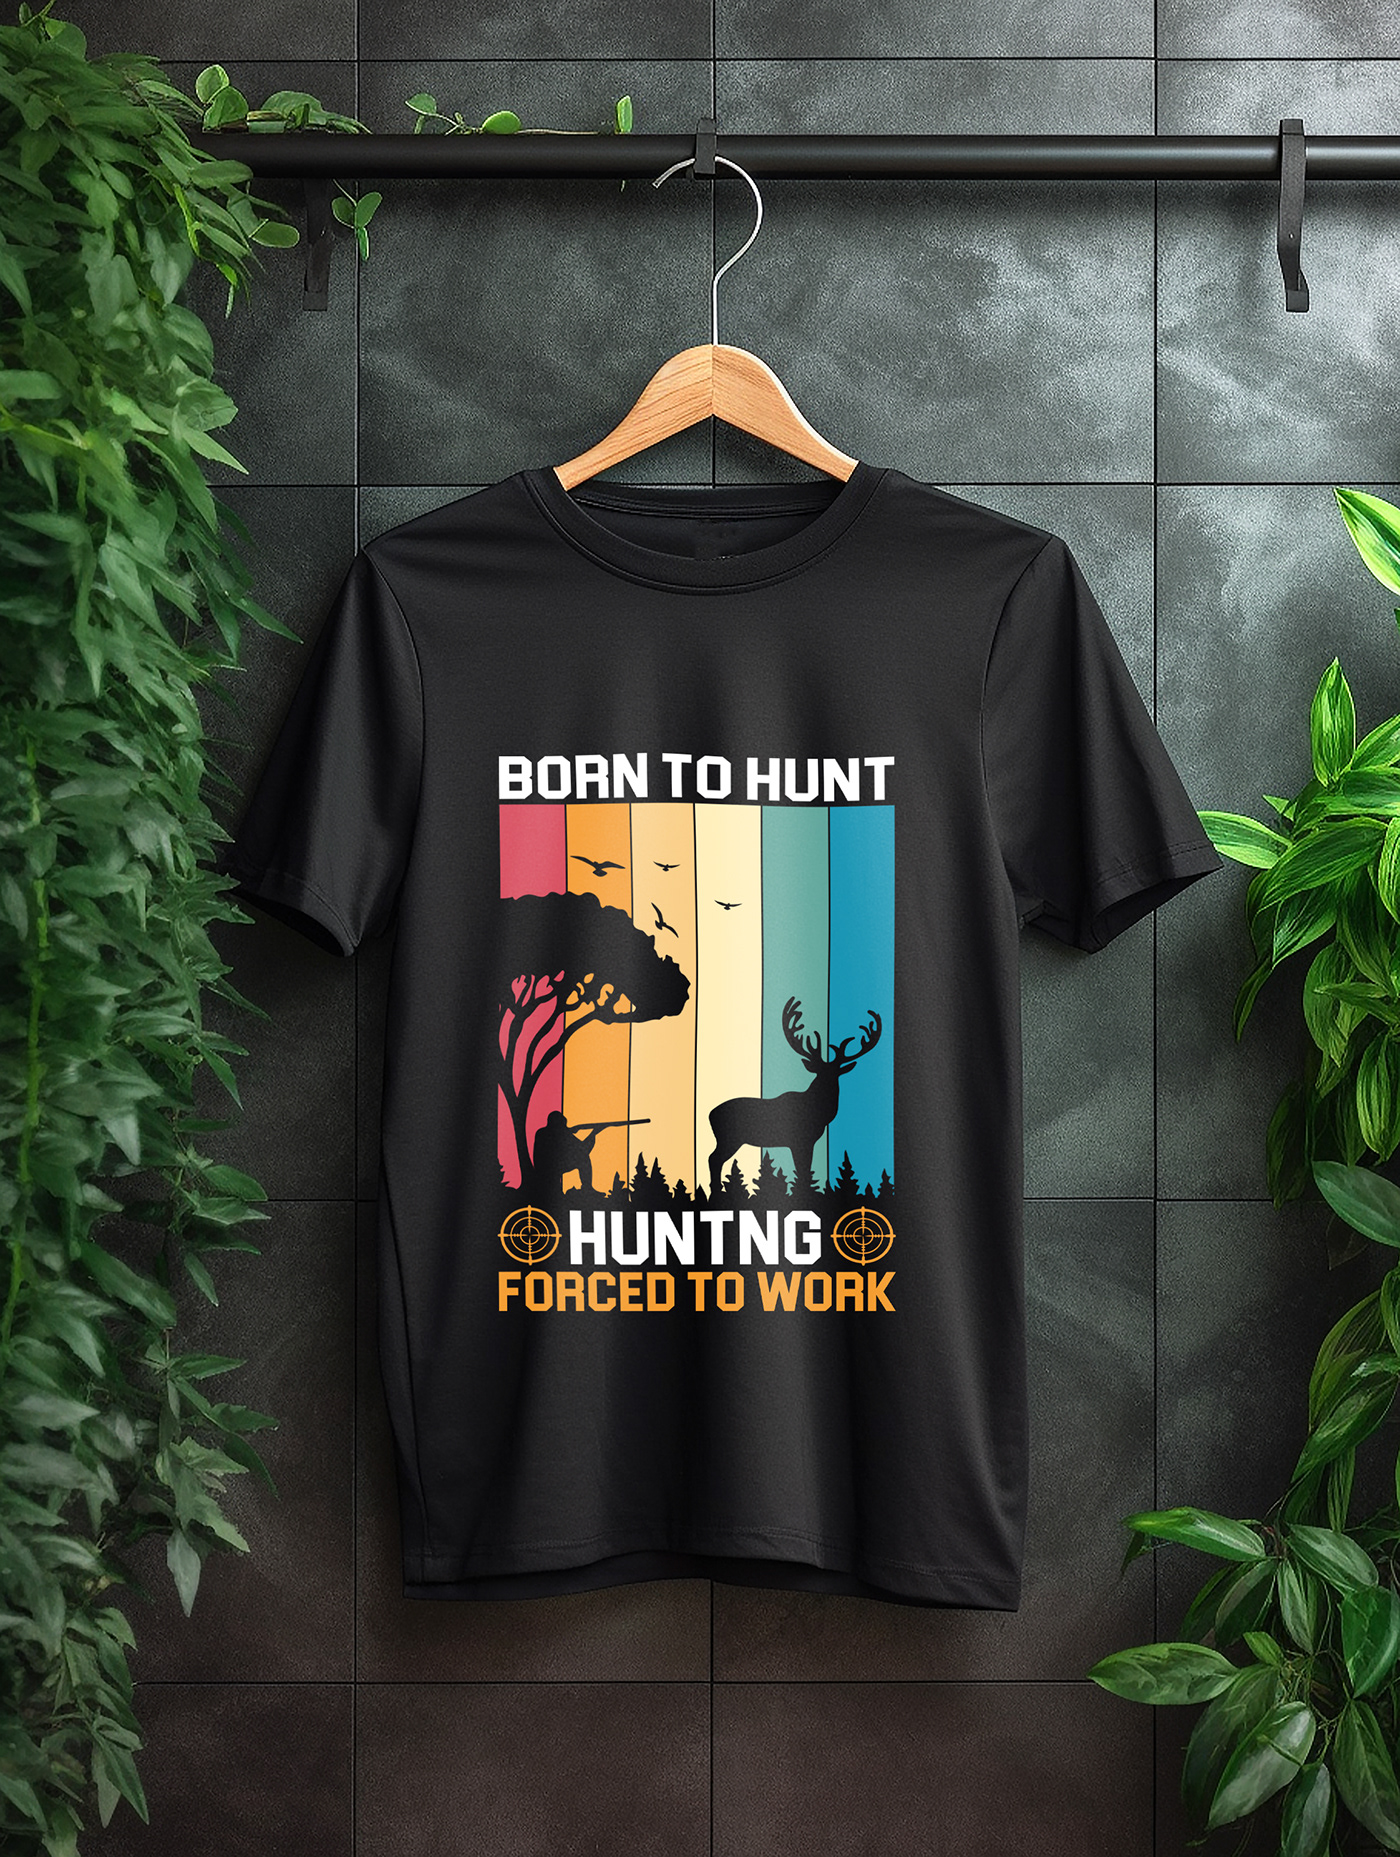 clothes, t-shirt, colours, front, hunting, print, shirt, signs, tee, textile, wear, apparel, art, bl